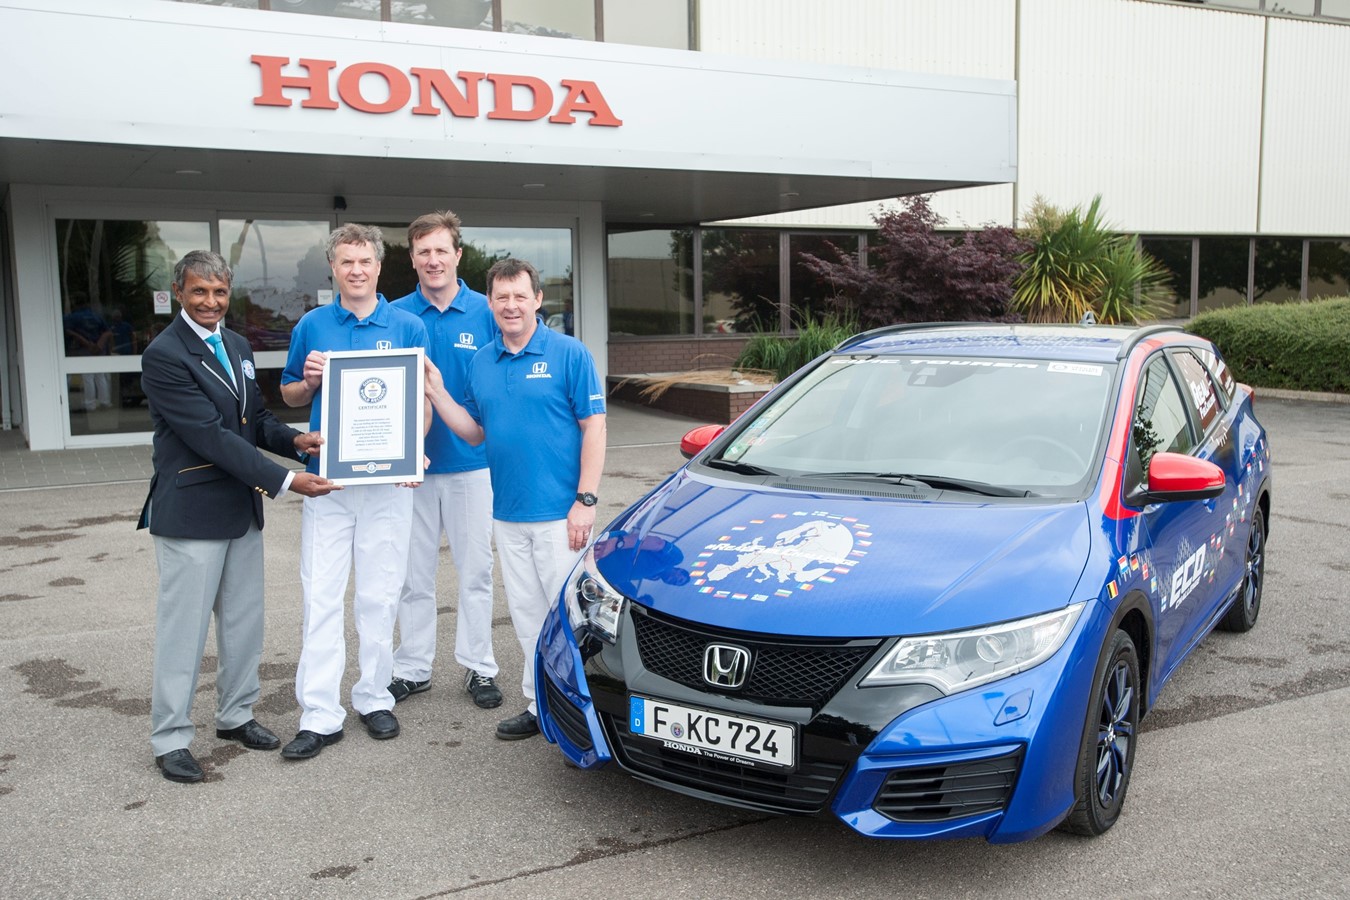 Honda sets new GUINNESS WORLD RECORDS(TM) title for fuel efficiency